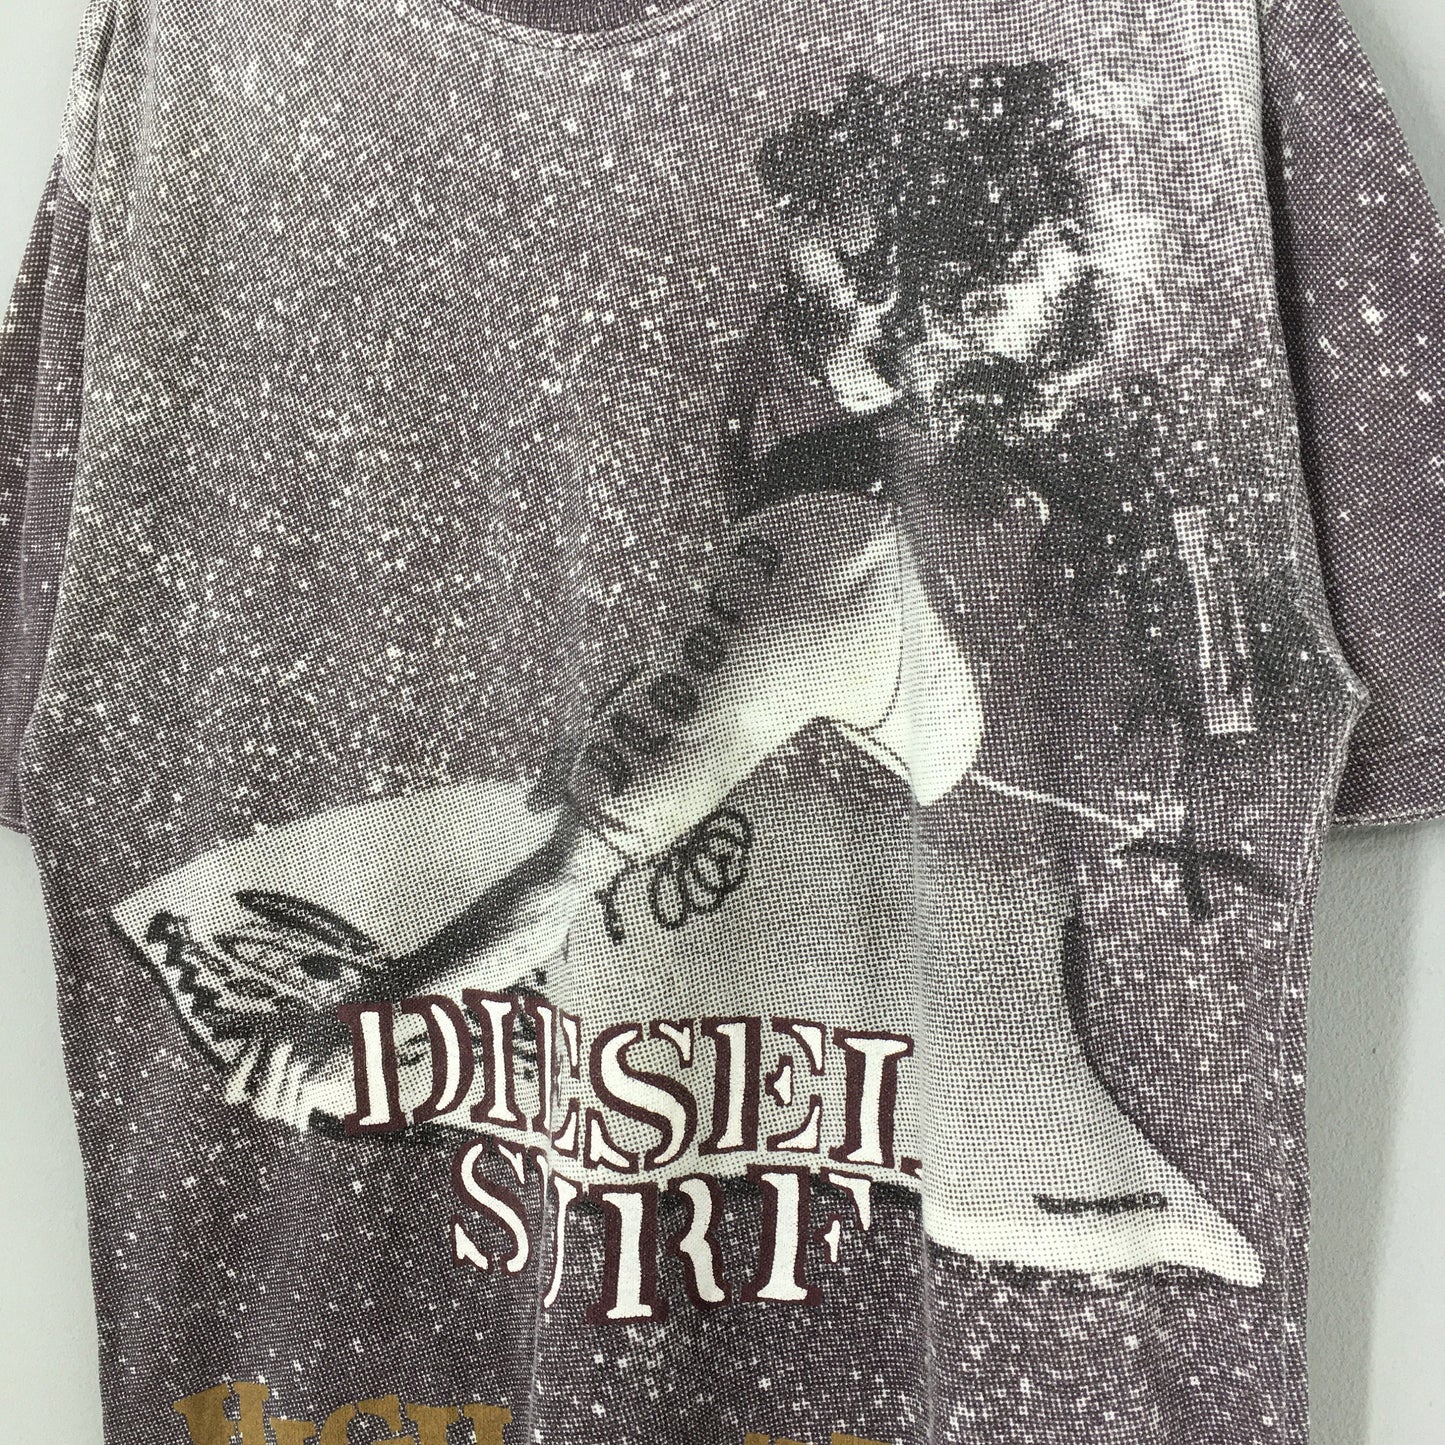 Diesel High And Tigh Surf Tshirt Large